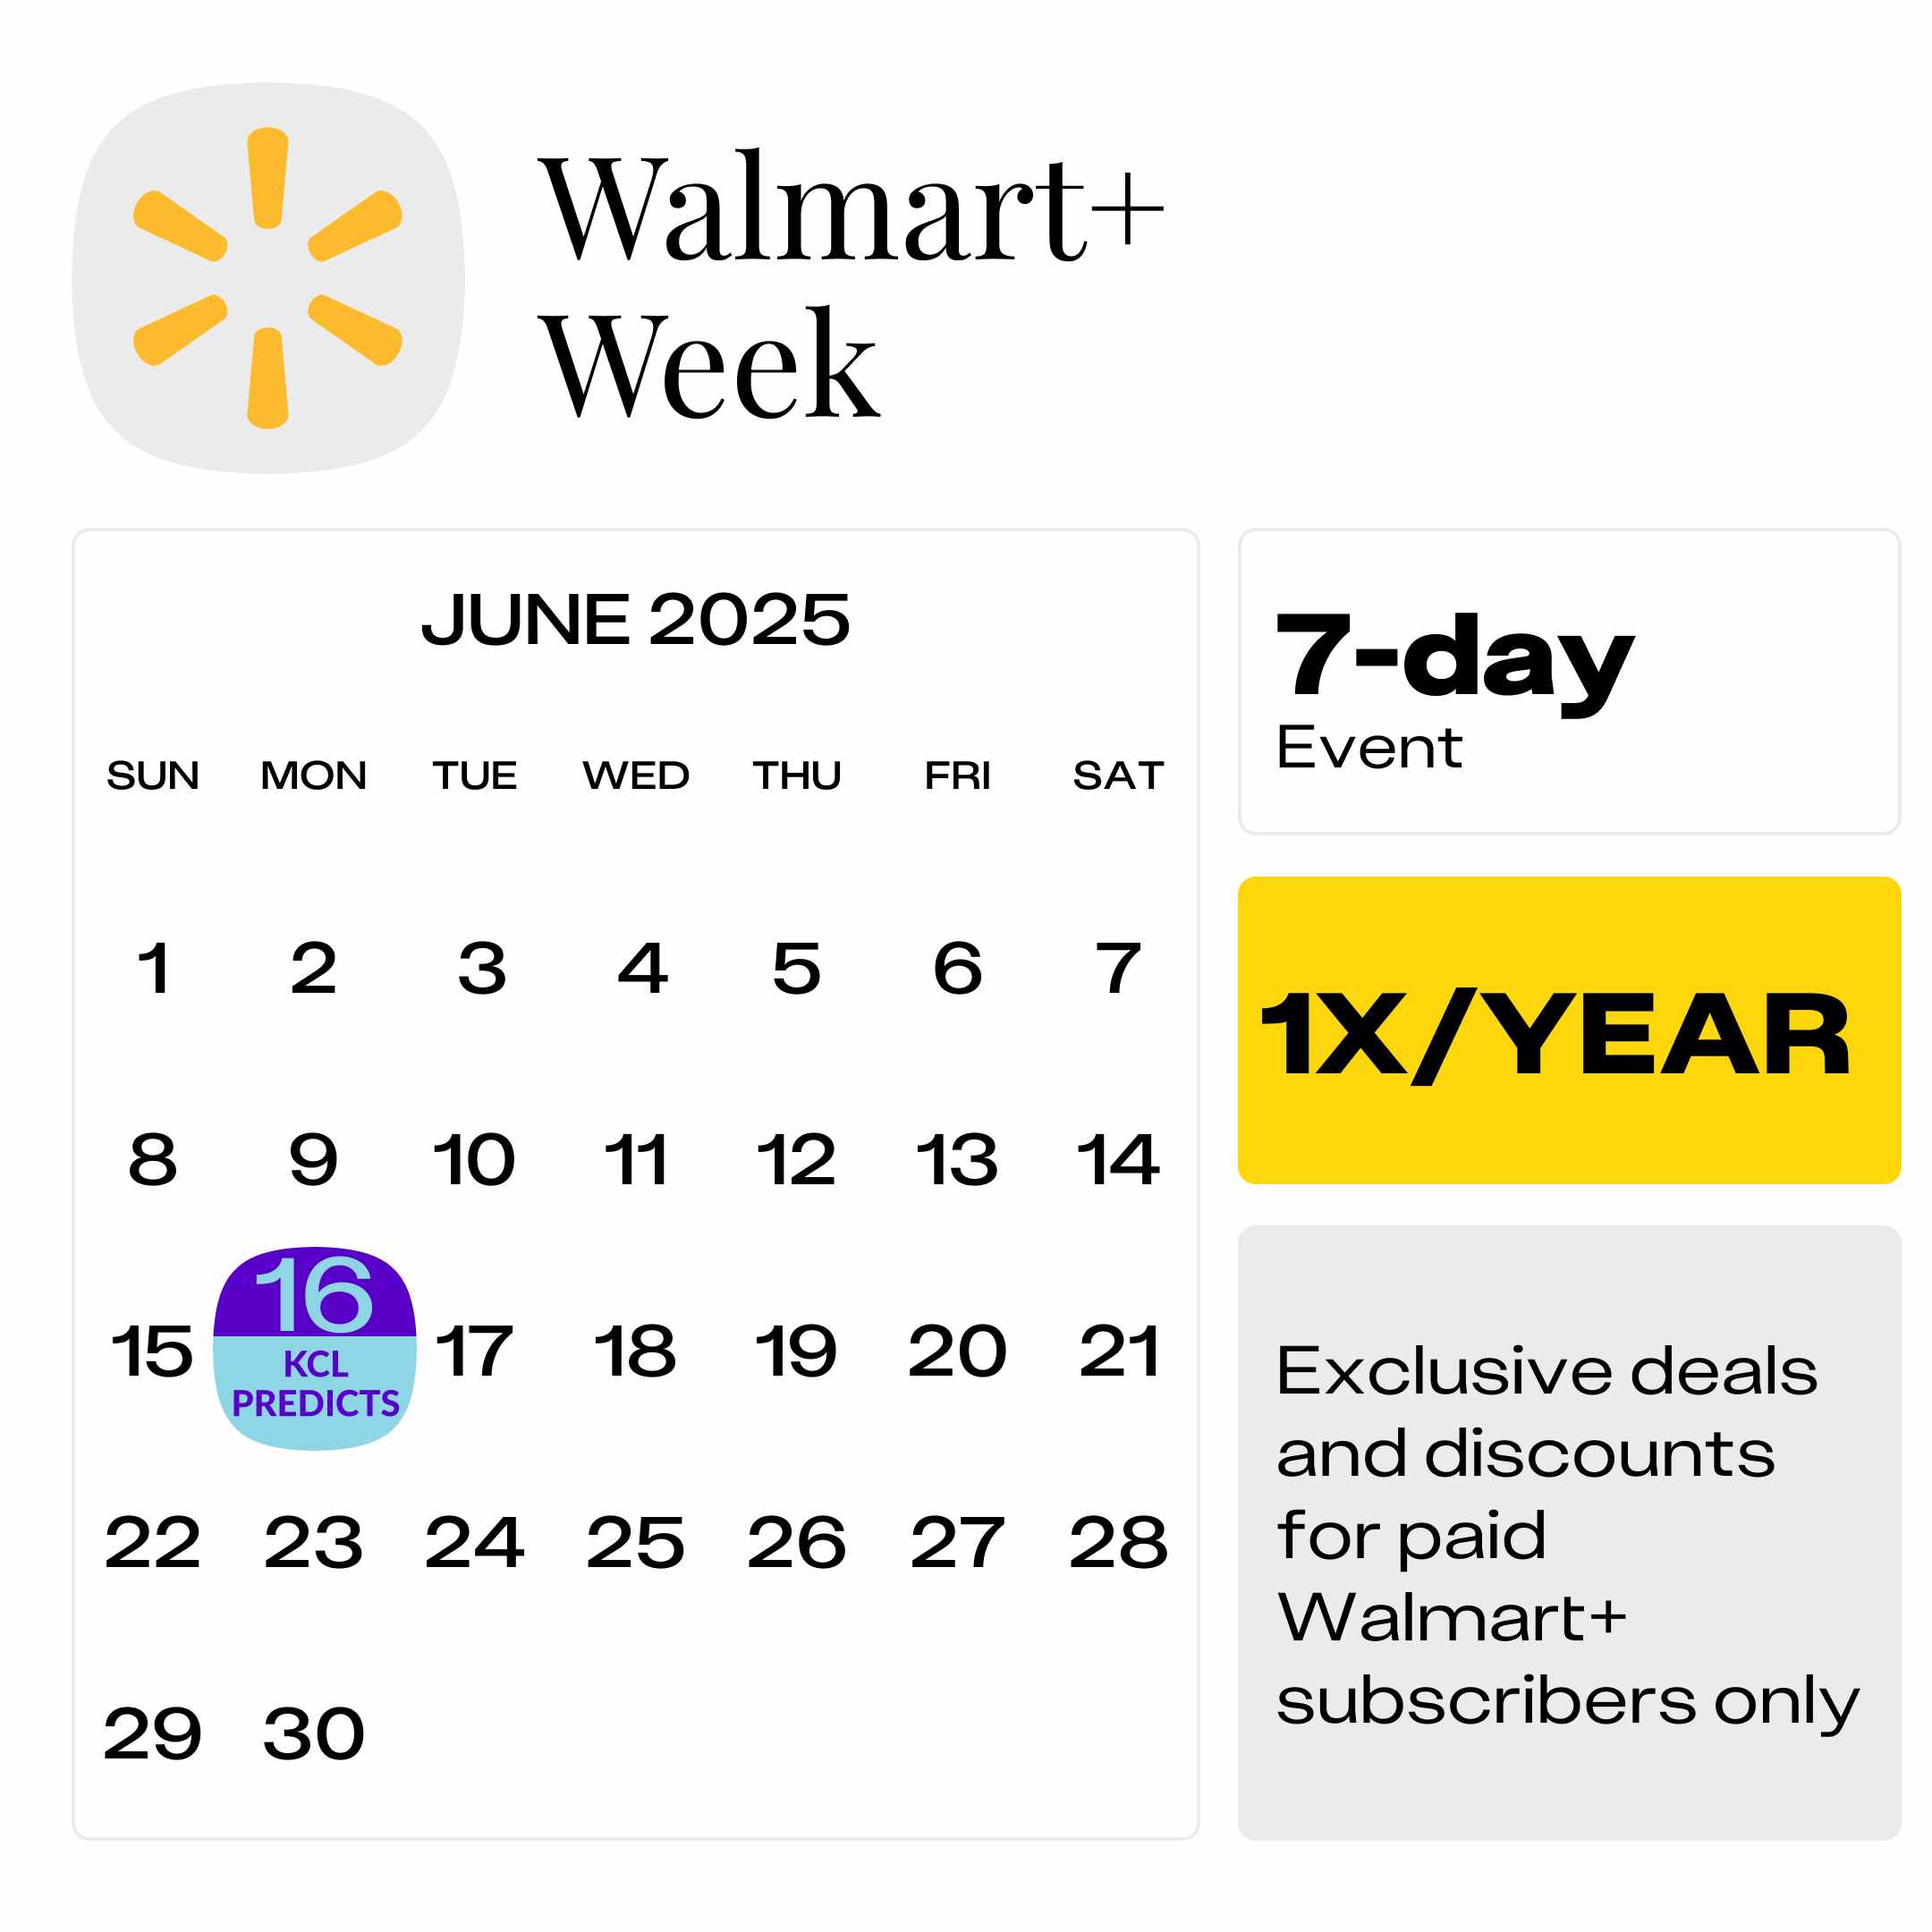 Calendar showing the predicted start date for the Walmart Plus Week sale on Monday, June 16, 2025.